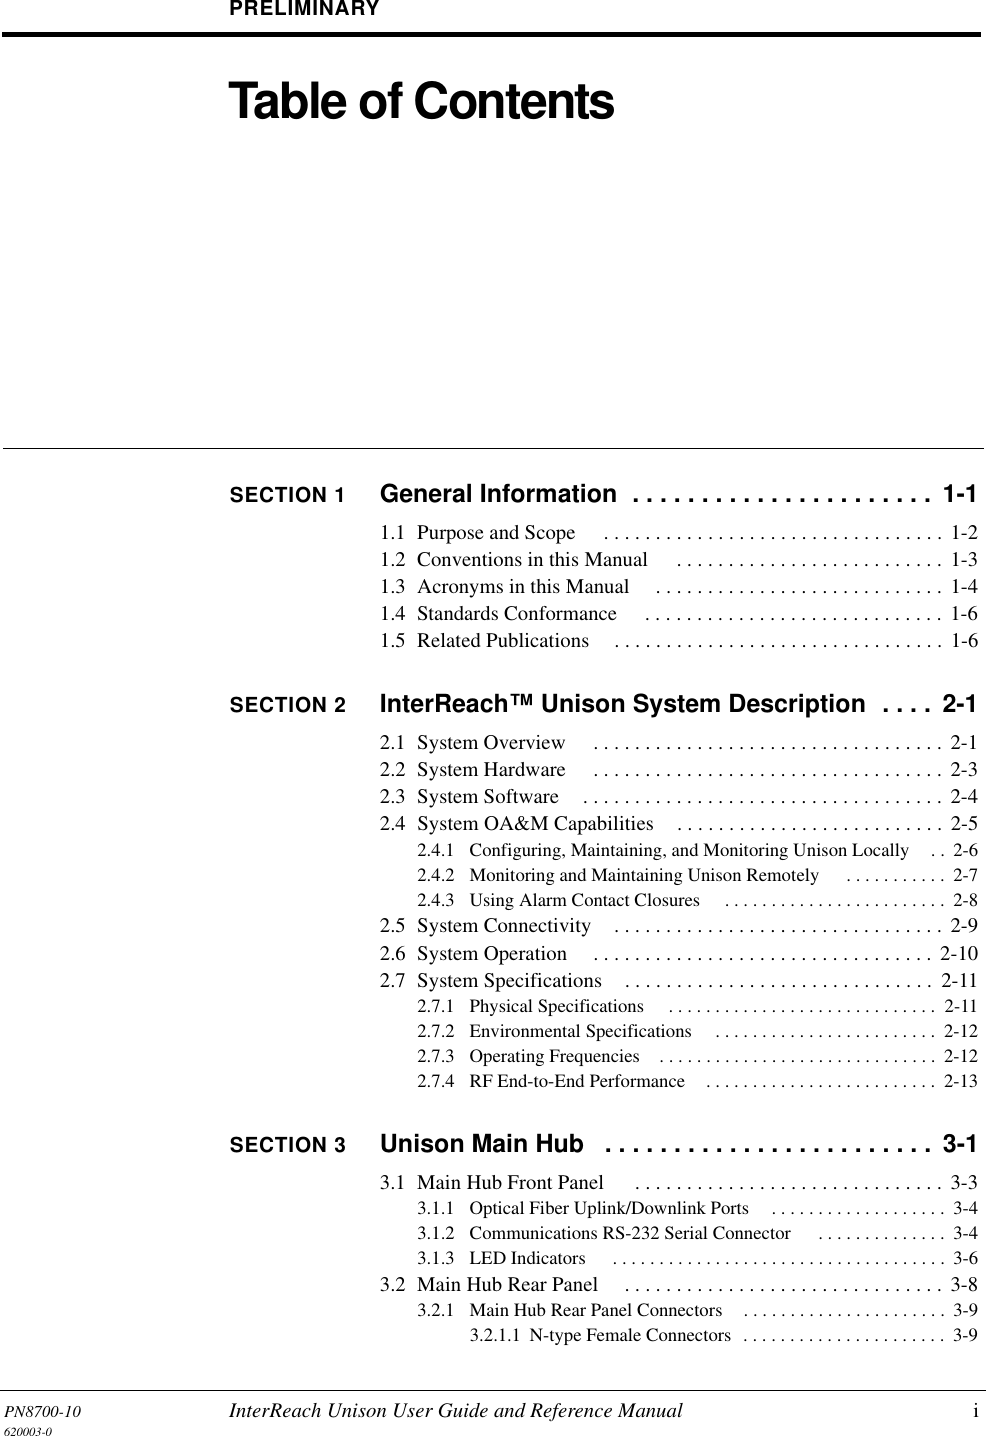 PN8700-10 InterReach Unison User Guide and Reference Manual i620003-0PRELIMINARYTable of ContentsSECTION 1 General Information  . . . . . . . . . . . . . . . . . . . . . .  1-11.1  Purpose and Scope  . . . . . . . . . . . . . . . . . . . . . . . . . . . . . . . . . 1-21.2  Conventions in this Manual  . . . . . . . . . . . . . . . . . . . . . . . . . . 1-31.3  Acronyms in this Manual  . . . . . . . . . . . . . . . . . . . . . . . . . . . .  1-41.4  Standards Conformance  . . . . . . . . . . . . . . . . . . . . . . . . . . . . .  1-61.5  Related Publications . . . . . . . . . . . . . . . . . . . . . . . . . . . . . . . . 1-6SECTION 2 InterReach™ Unison System Description  . . . .  2-12.1  System Overview  . . . . . . . . . . . . . . . . . . . . . . . . . . . . . . . . . . 2-12.2  System Hardware  . . . . . . . . . . . . . . . . . . . . . . . . . . . . . . . . . . 2-32.3  System Software . . . . . . . . . . . . . . . . . . . . . . . . . . . . . . . . . . .  2-42.4  System OA&amp;M Capabilities . . . . . . . . . . . . . . . . . . . . . . . . . .  2-52.4.1  Configuring, Maintaining, and Monitoring Unison Locally . .  2-62.4.2  Monitoring and Maintaining Unison Remotely  . . . . . . . . . . .  2-72.4.3  Using Alarm Contact Closures  . . . . . . . . . . . . . . . . . . . . . . . .  2-82.5  System Connectivity . . . . . . . . . . . . . . . . . . . . . . . . . . . . . . . . 2-92.6  System Operation  . . . . . . . . . . . . . . . . . . . . . . . . . . . . . . . . . 2-102.7  System Specifications . . . . . . . . . . . . . . . . . . . . . . . . . . . . . .  2-112.7.1  Physical Specifications  . . . . . . . . . . . . . . . . . . . . . . . . . . . . .  2-112.7.2  Environmental Specifications  . . . . . . . . . . . . . . . . . . . . . . . .  2-122.7.3  Operating Frequencies . . . . . . . . . . . . . . . . . . . . . . . . . . . . . .  2-122.7.4  RF End-to-End Performance . . . . . . . . . . . . . . . . . . . . . . . . .  2-13SECTION 3 Unison Main Hub   . . . . . . . . . . . . . . . . . . . . . . . .  3-13.1  Main Hub Front Panel  . . . . . . . . . . . . . . . . . . . . . . . . . . . . . .  3-33.1.1  Optical Fiber Uplink/Downlink Ports . . . . . . . . . . . . . . . . . . .  3-43.1.2  Communications RS-232 Serial Connector  . . . . . . . . . . . . . .  3-43.1.3  LED Indicators  . . . . . . . . . . . . . . . . . . . . . . . . . . . . . . . . . . . .  3-63.2  Main Hub Rear Panel  . . . . . . . . . . . . . . . . . . . . . . . . . . . . . . .  3-83.2.1  Main Hub Rear Panel Connectors . . . . . . . . . . . . . . . . . . . . . .  3-93.2.1.1  N-type Female Connectors  . . . . . . . . . . . . . . . . . . . . . .  3-9